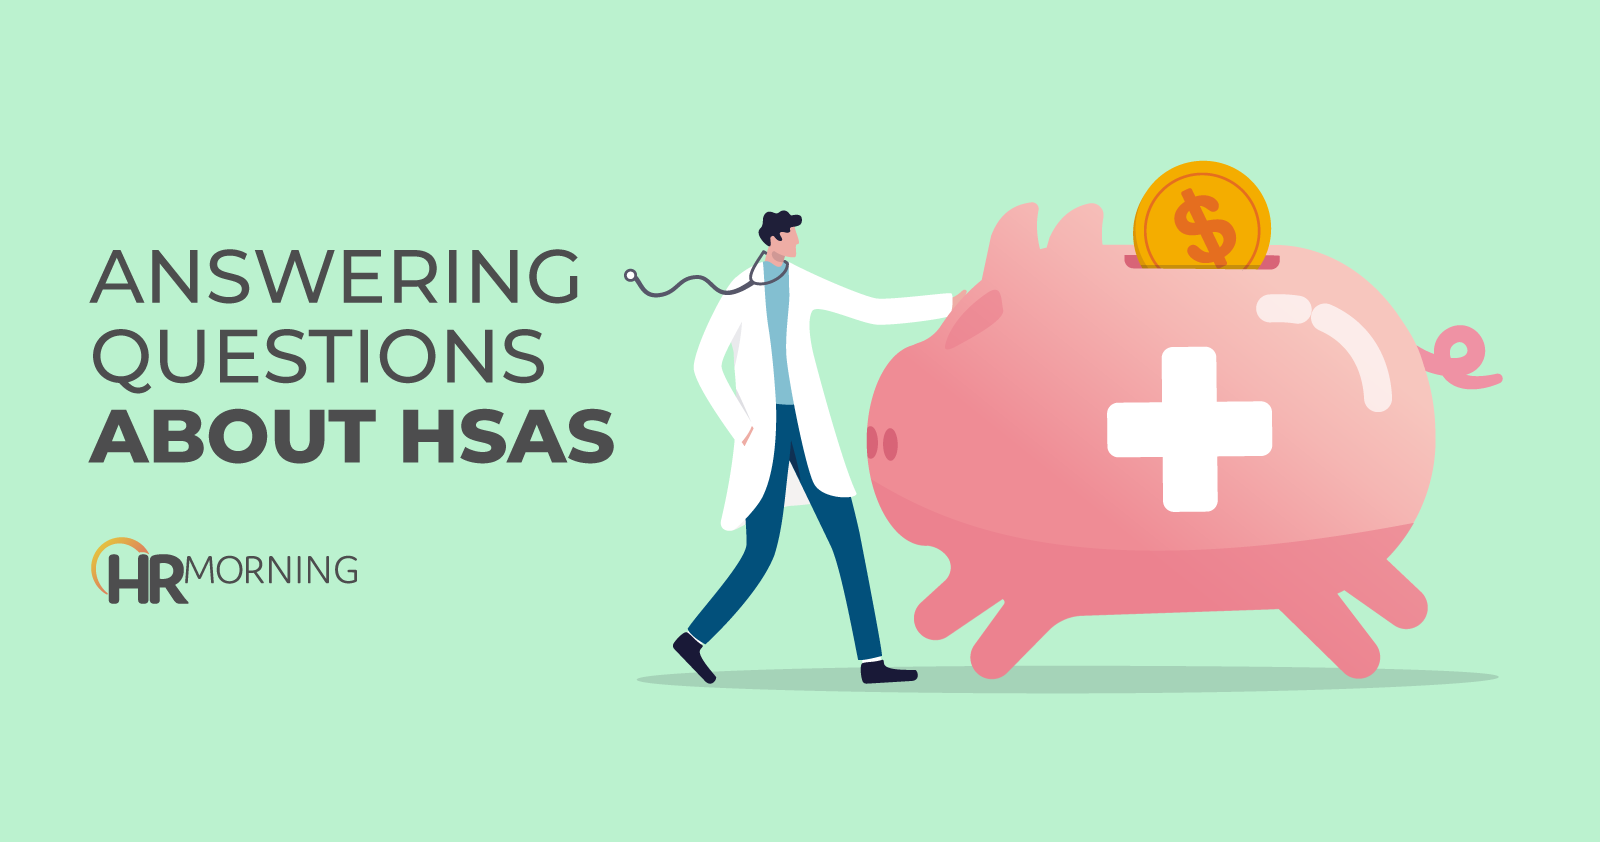 Answering questions about HSAs